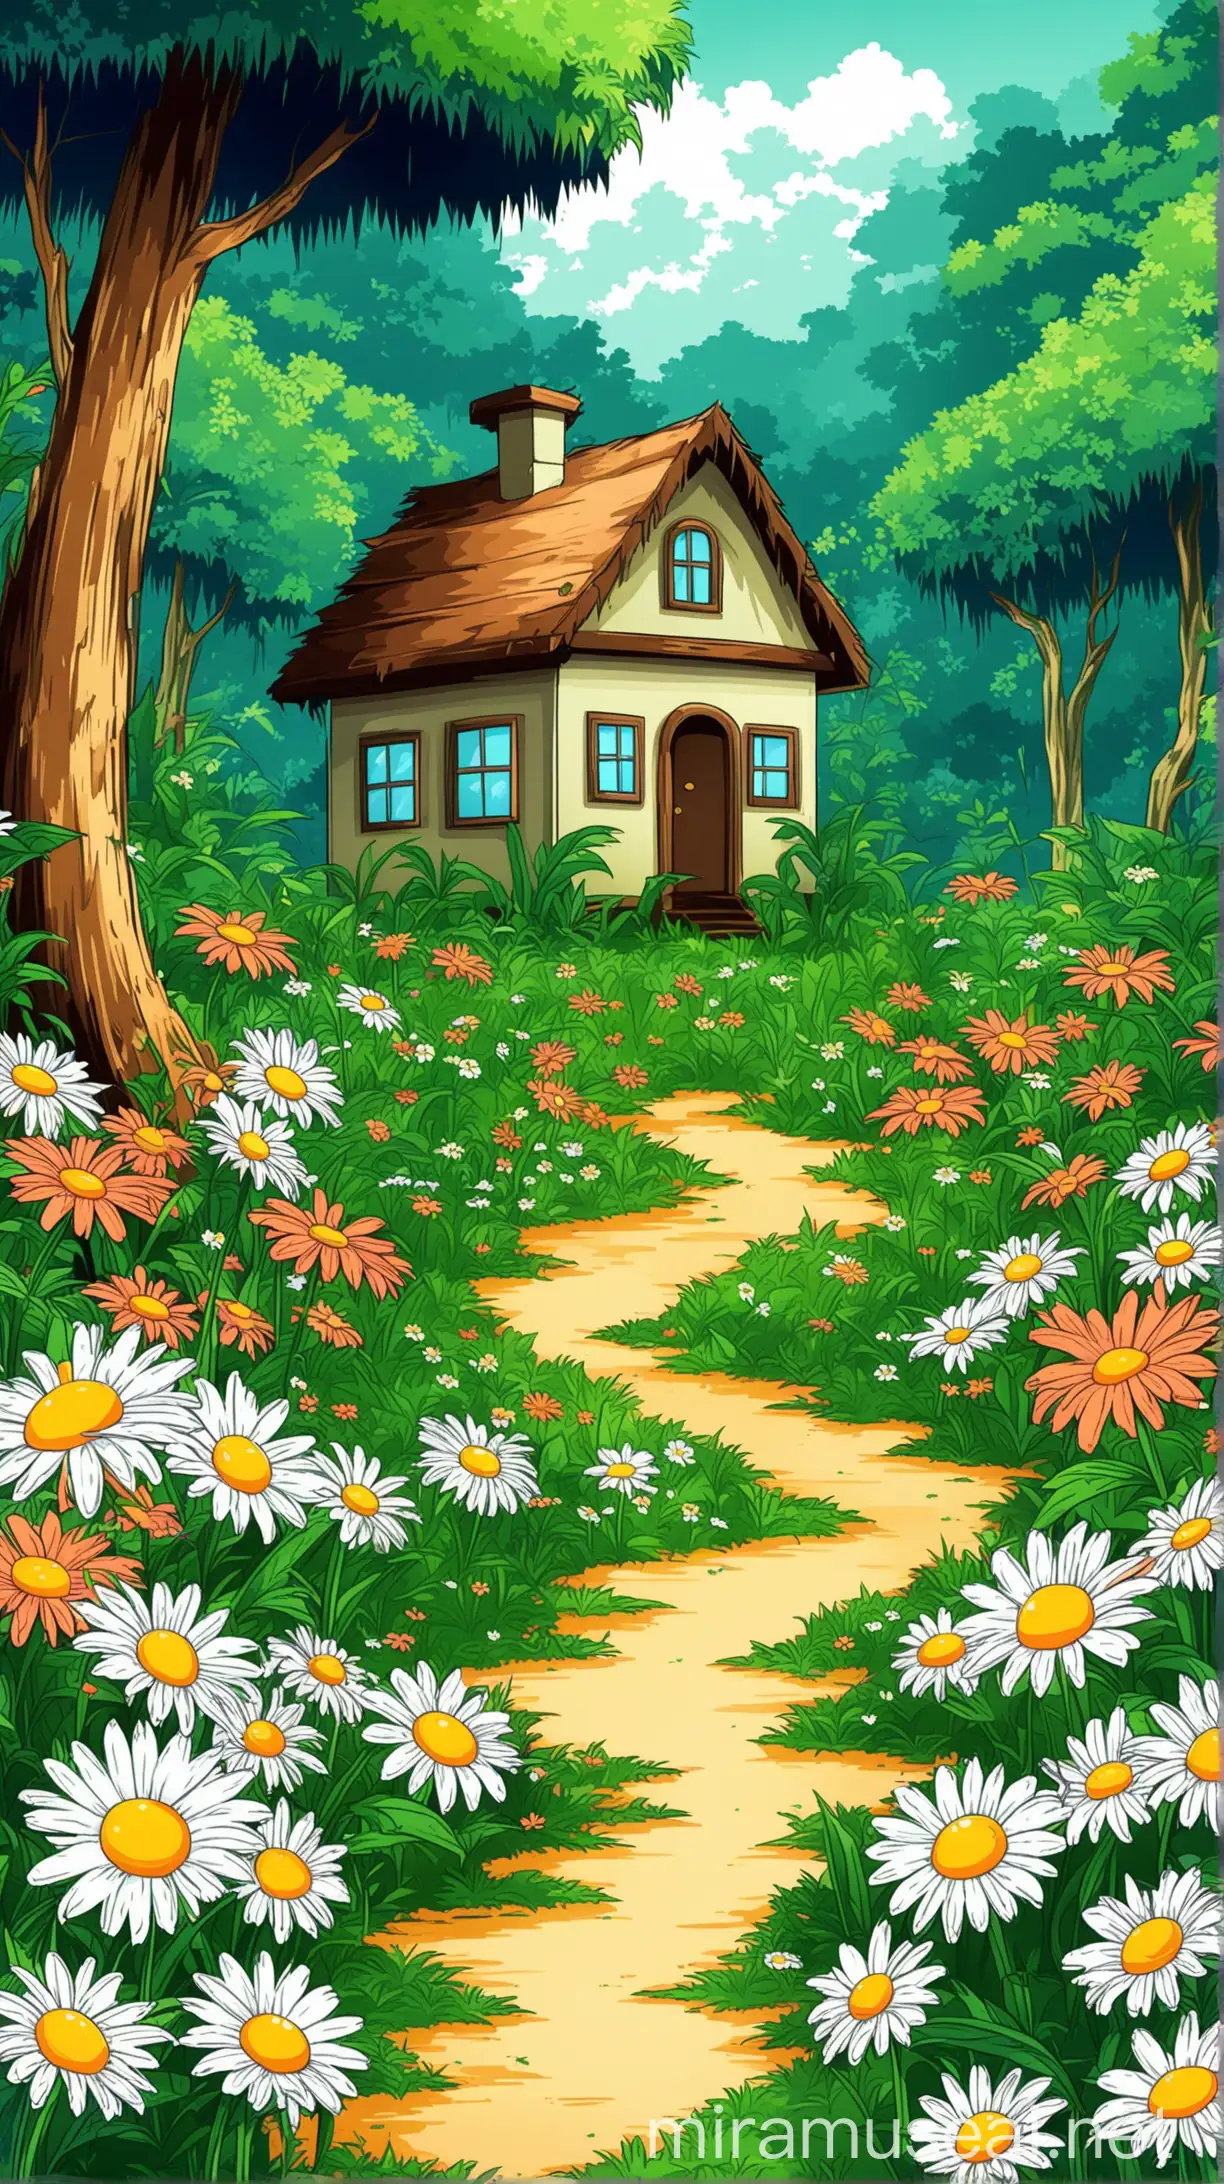  small alone cute house mid of jungle around by nature , daisy flower garden, anime style vector wallpaper